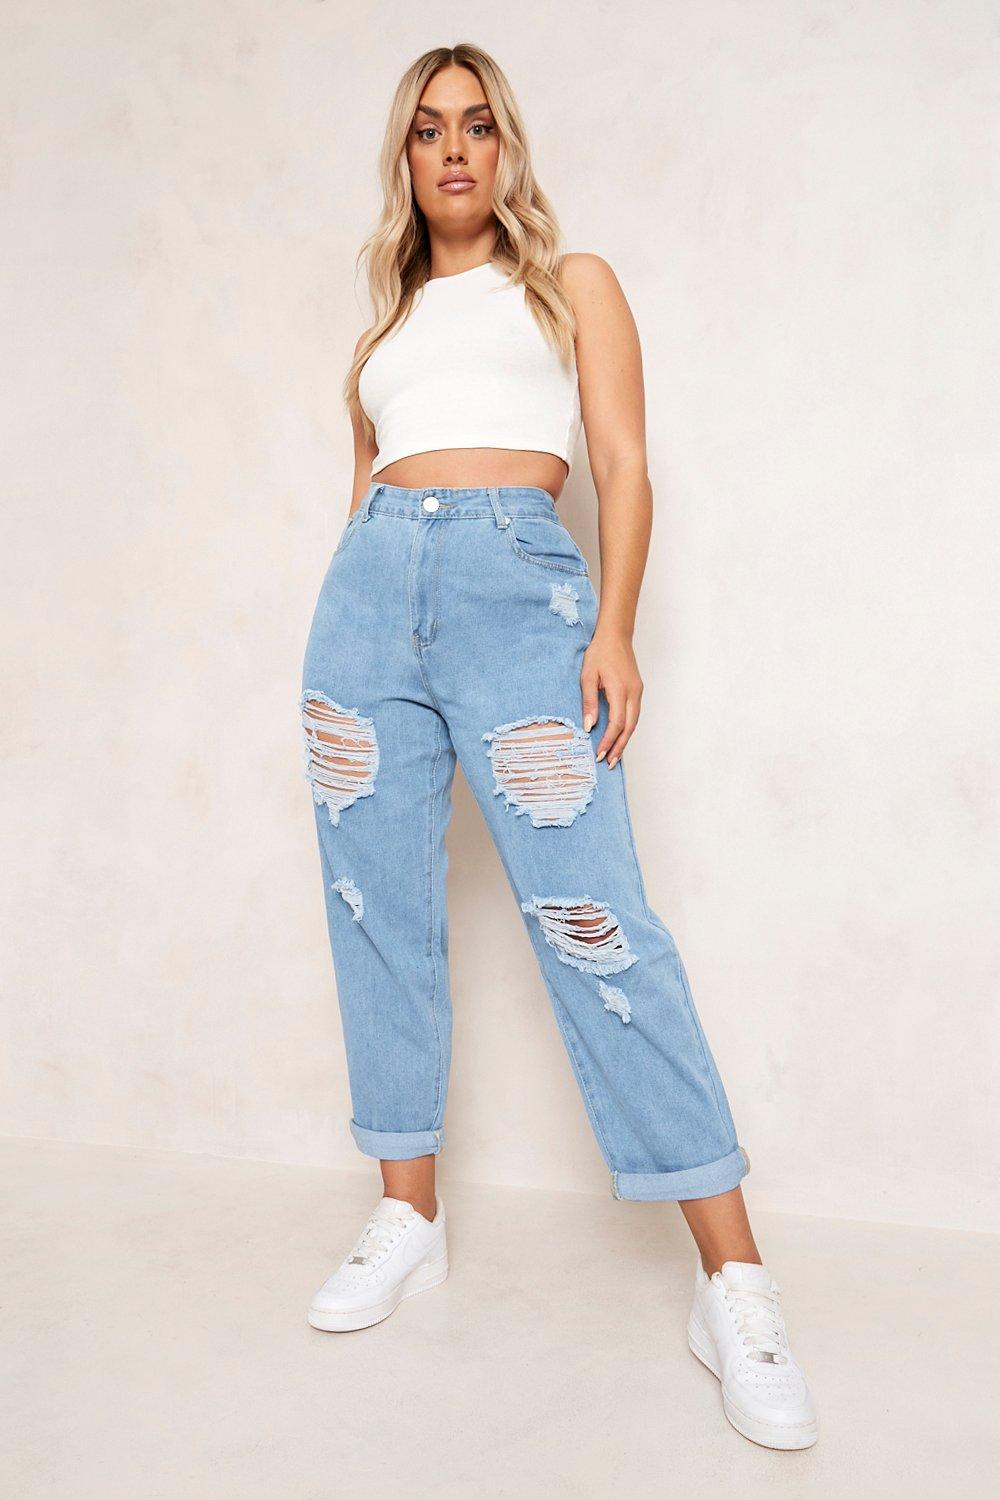 Plus Distressed Ripped Mom Jeans boohoo